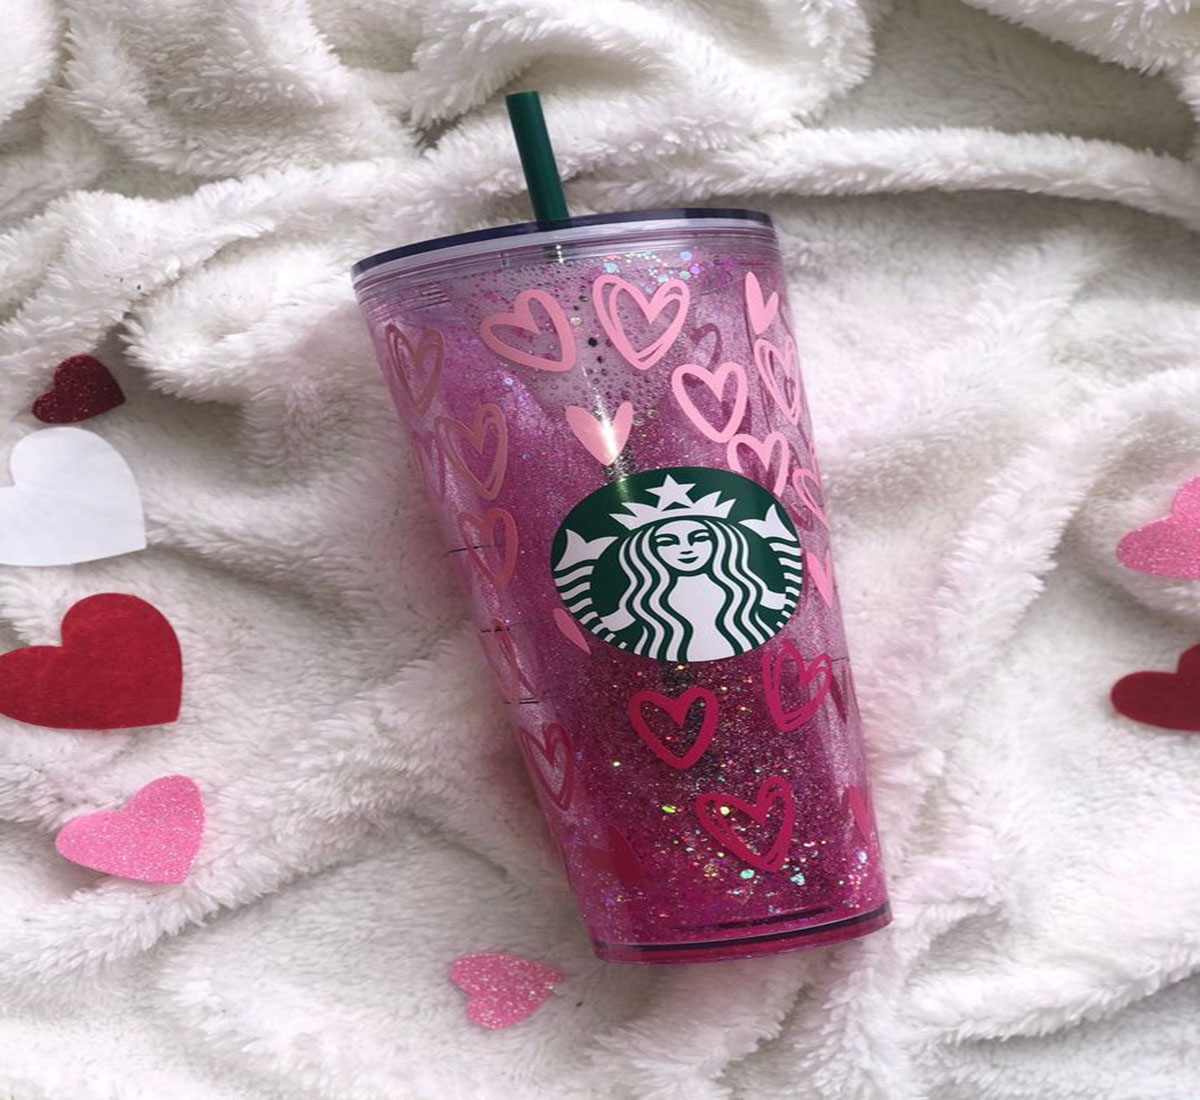 Starbucks coffee travel mug - THIS STYLE LID - not a 'squeeze to sip' style   Starbucks stainless steel tumbler, Starbucks coffee tumbler, Starbucks  bottles